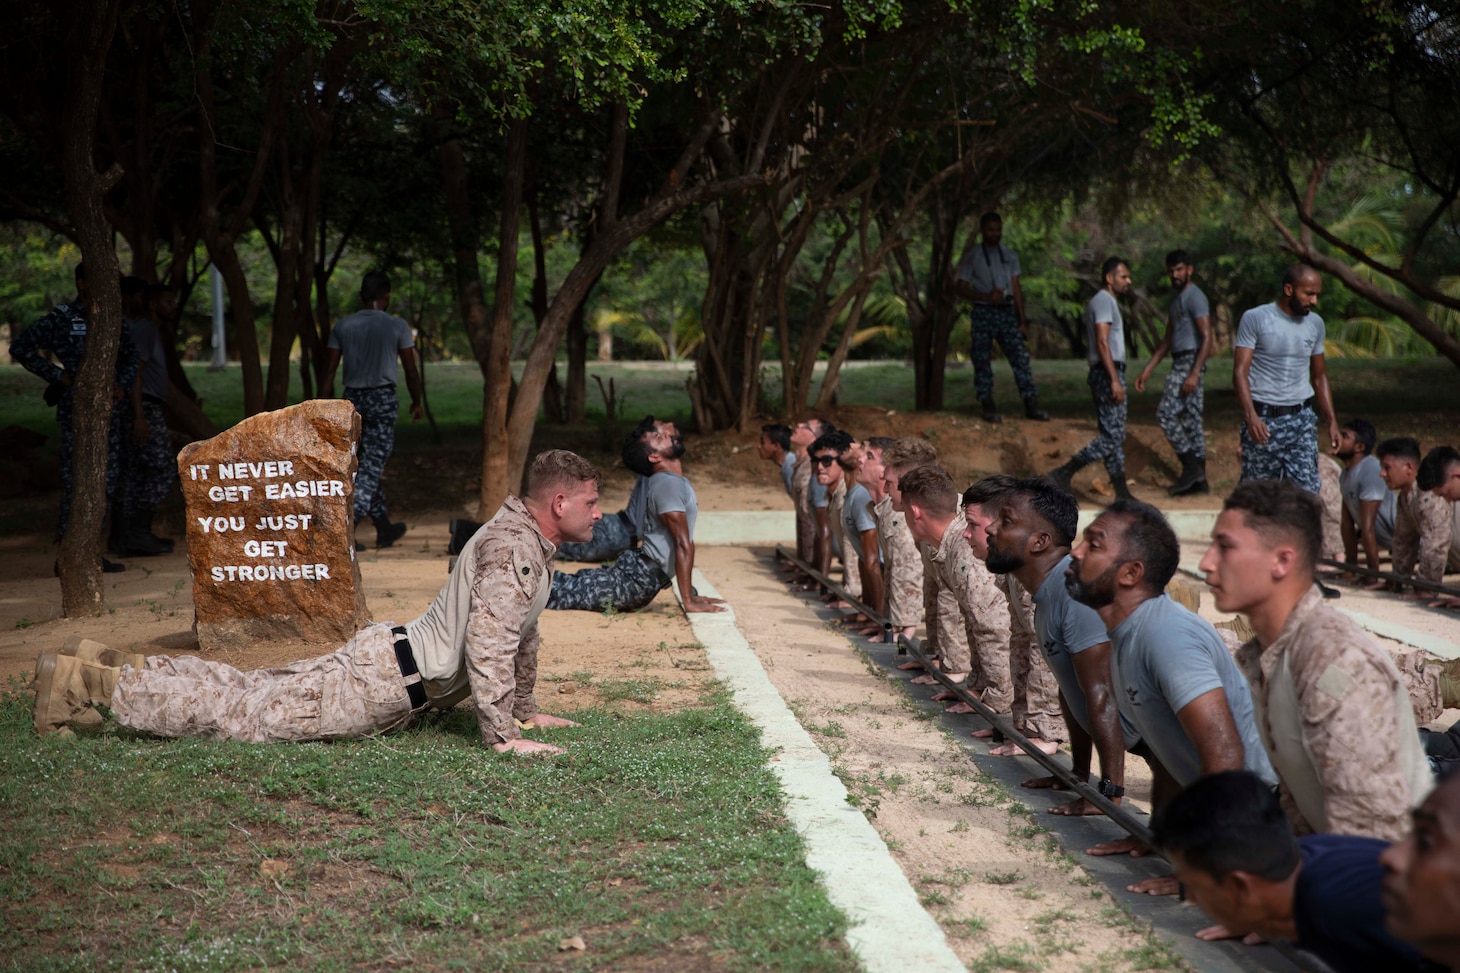 U.S. Marines assigned to Fleet Anti-Terrorism Security Team Pacific and members of the Sri Lanka Navy (SLN) take part in group physical training as part of exercise Cooperation Afloat Readiness and Training (CARAT) Sri Lanka 2024 at SLNS Vidura, April 23. CARAT Sri Lanka is a bilateral exercise between Sri Lanka and the United States designed to promote regional security cooperation and strengthen maritime understanding, partnerships, and interoperability. In its 29th year, the CARAT series is comprised of multinational exercises, designed to enhance U.S. and partner forces’ abilities to operate together in response to traditional and non-traditional maritime security challenges in the Indo-Pacific region. (U.S. Navy photo by Mass Communication Specialist 1st Class Charles Oki)